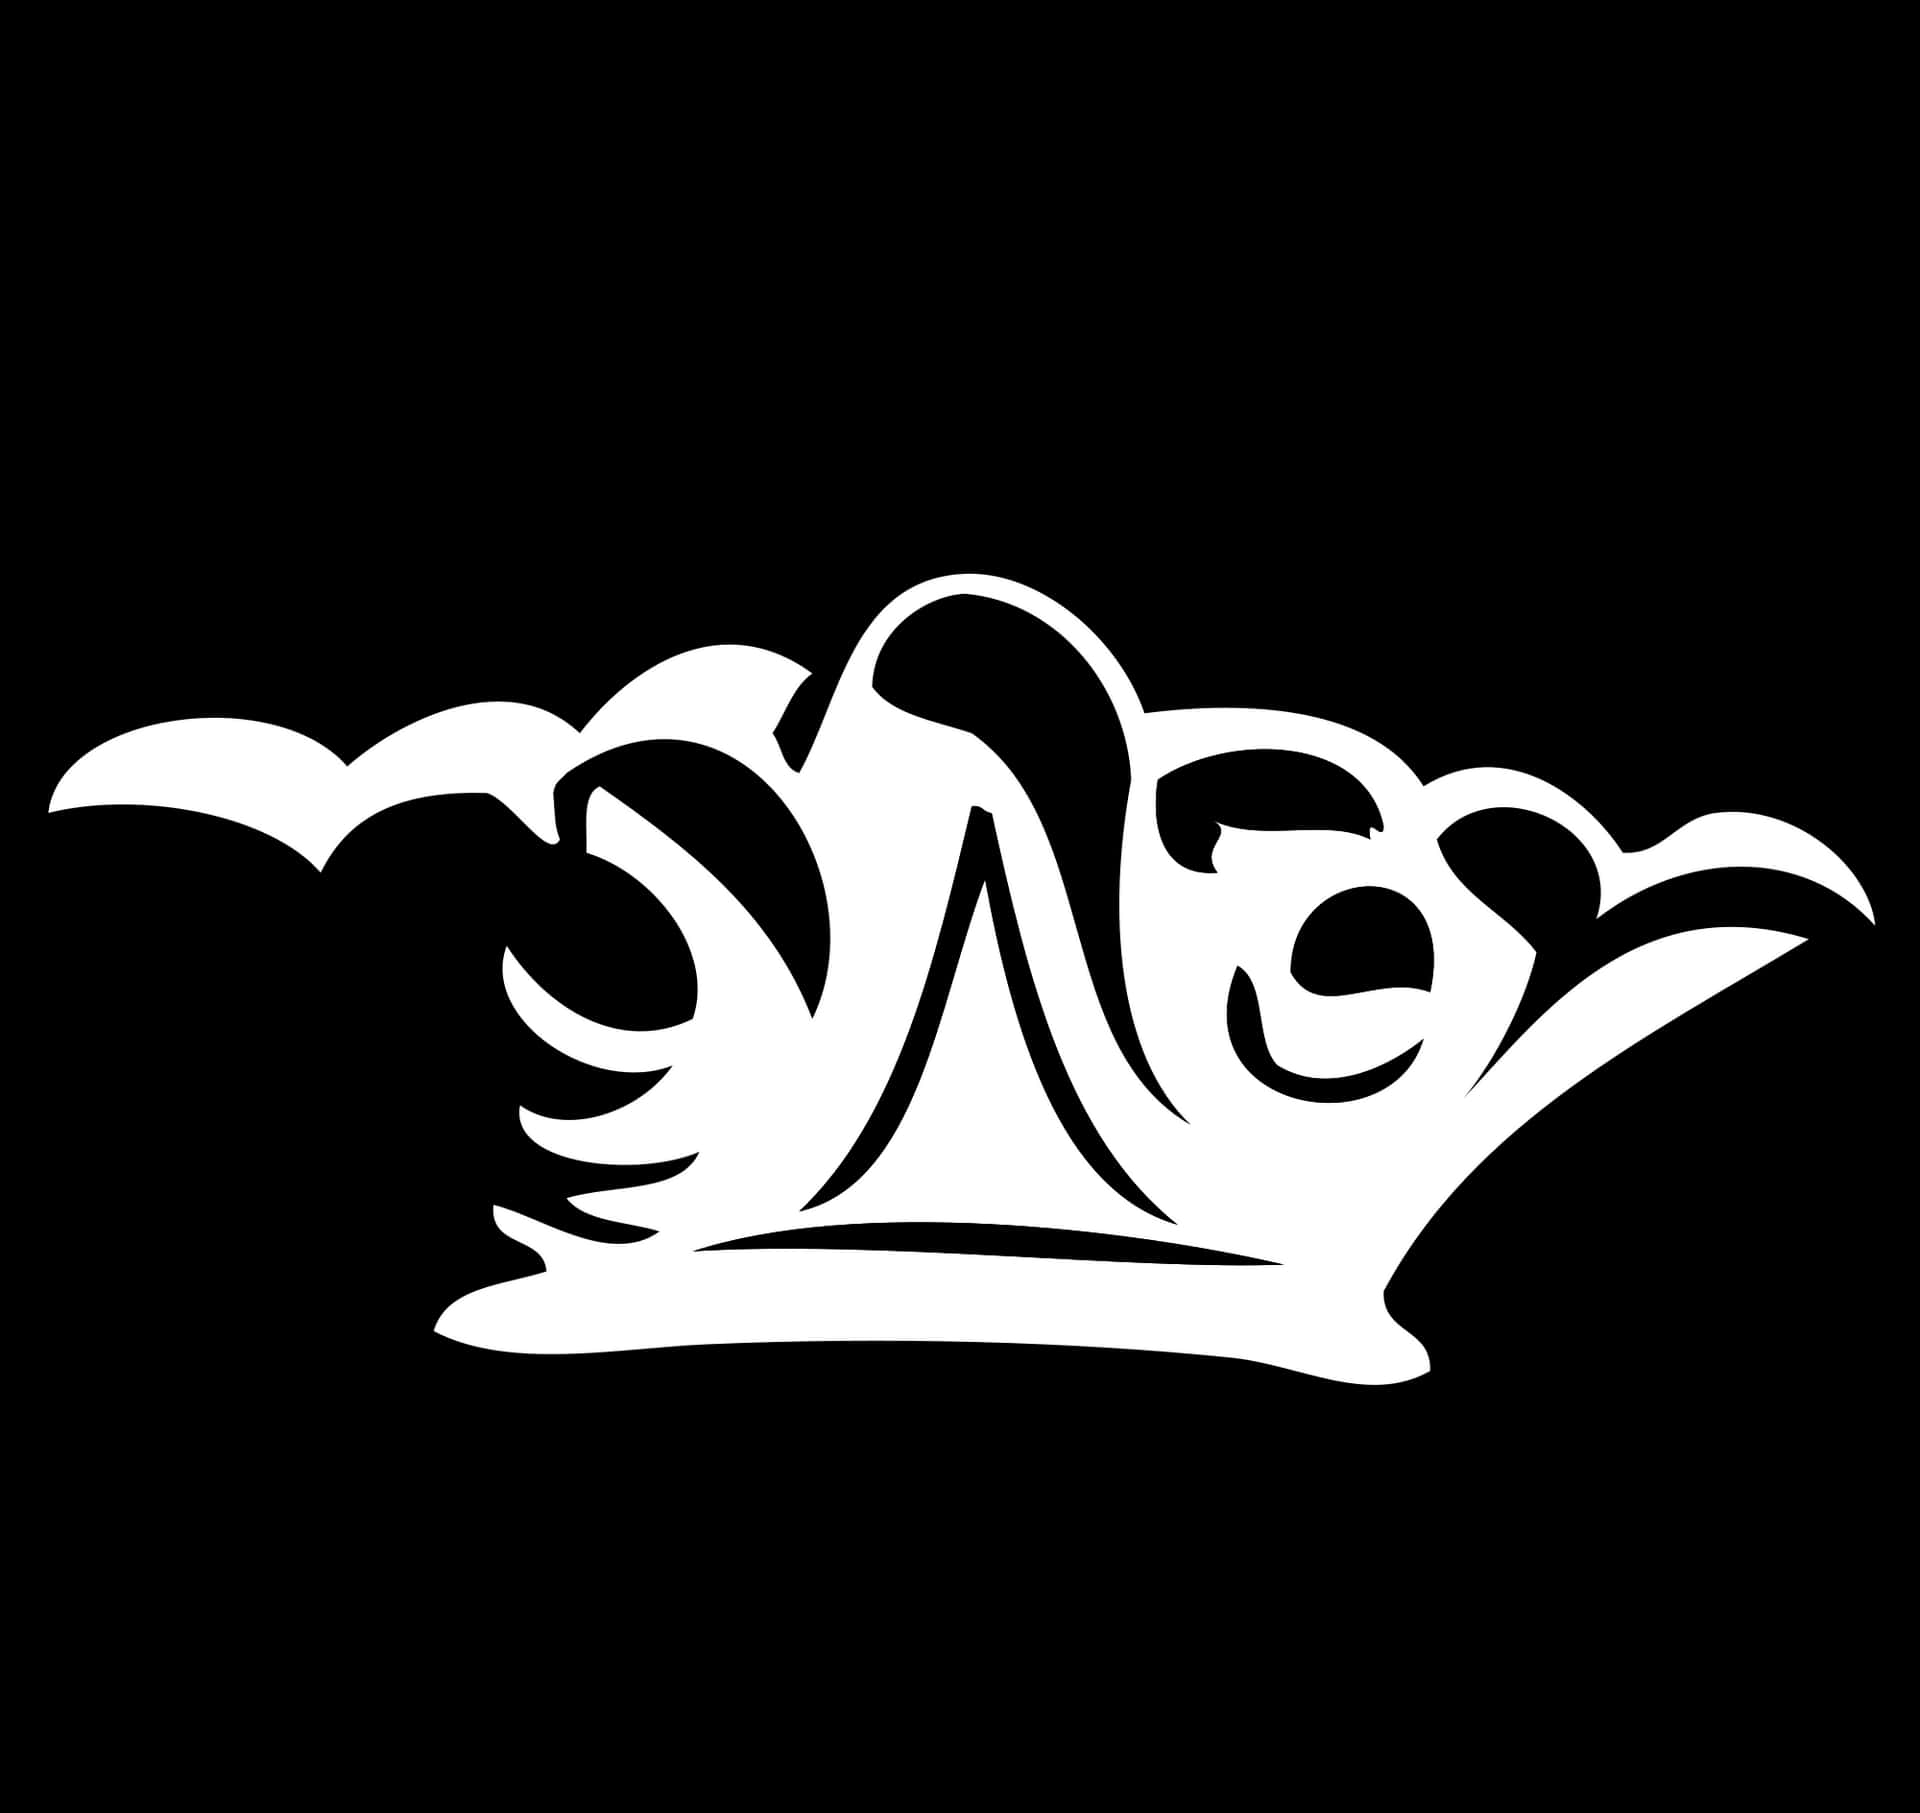 Stylized Crown Graphic Blackand White PNG